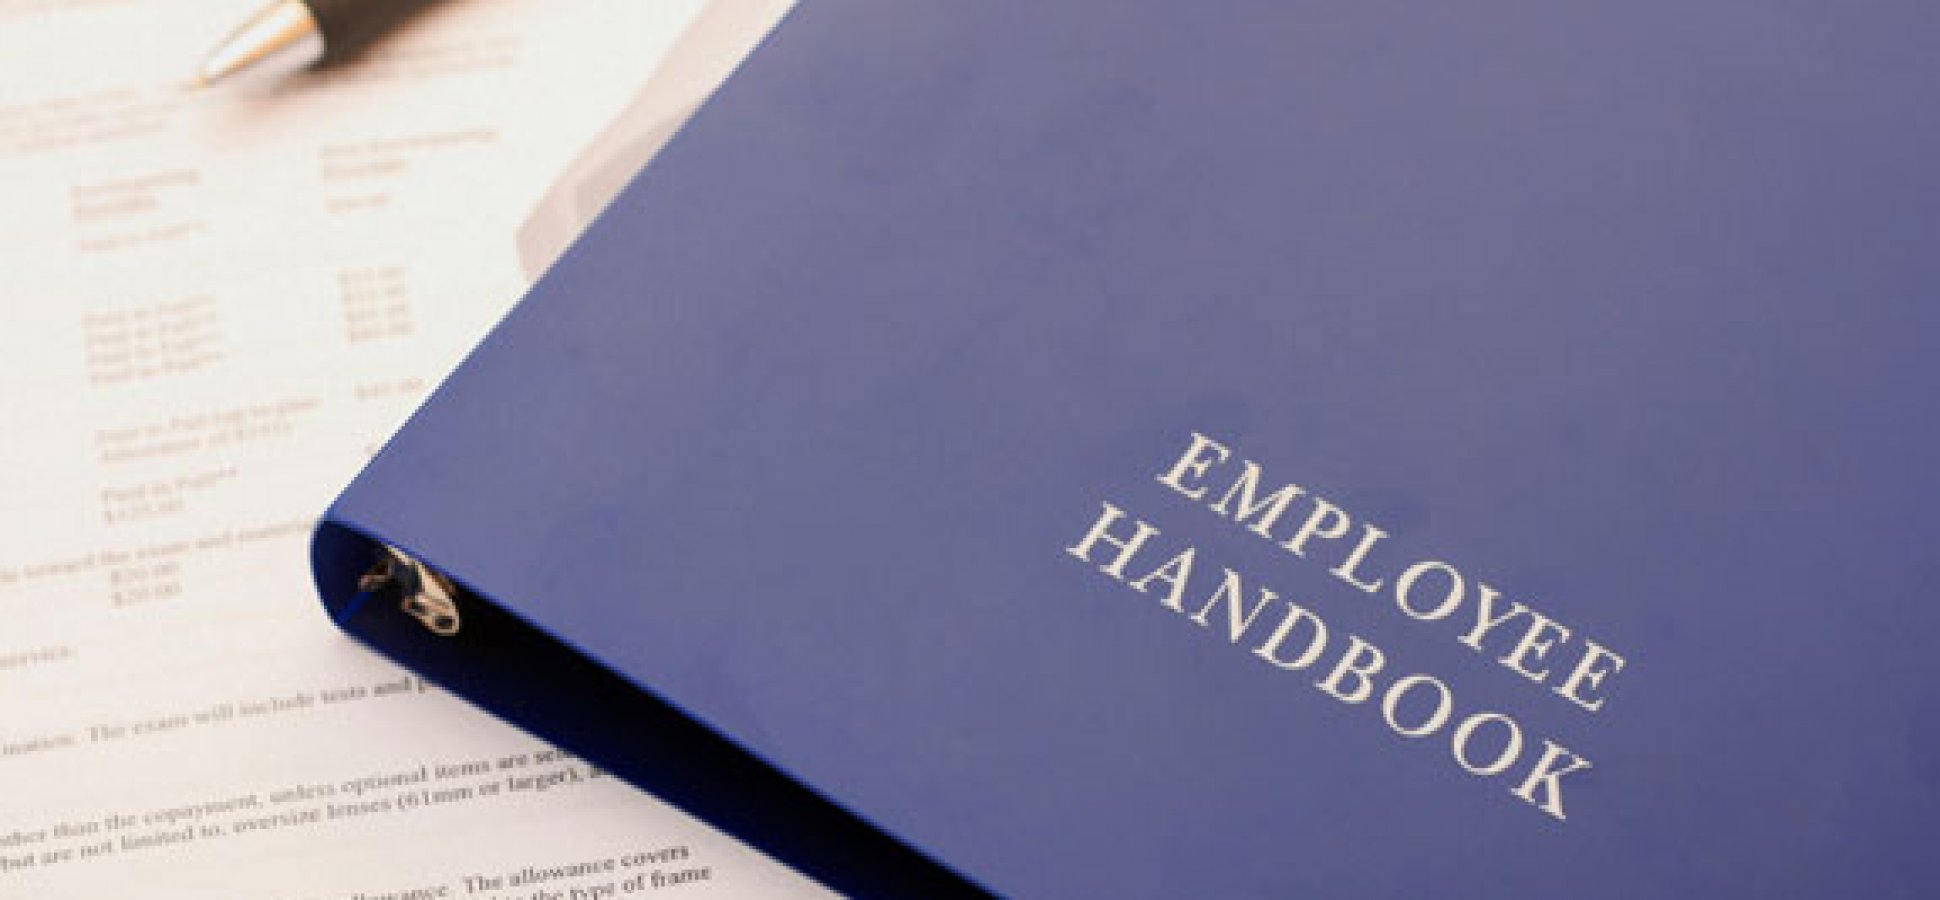 An employee handbook sits on top of a stack of papers